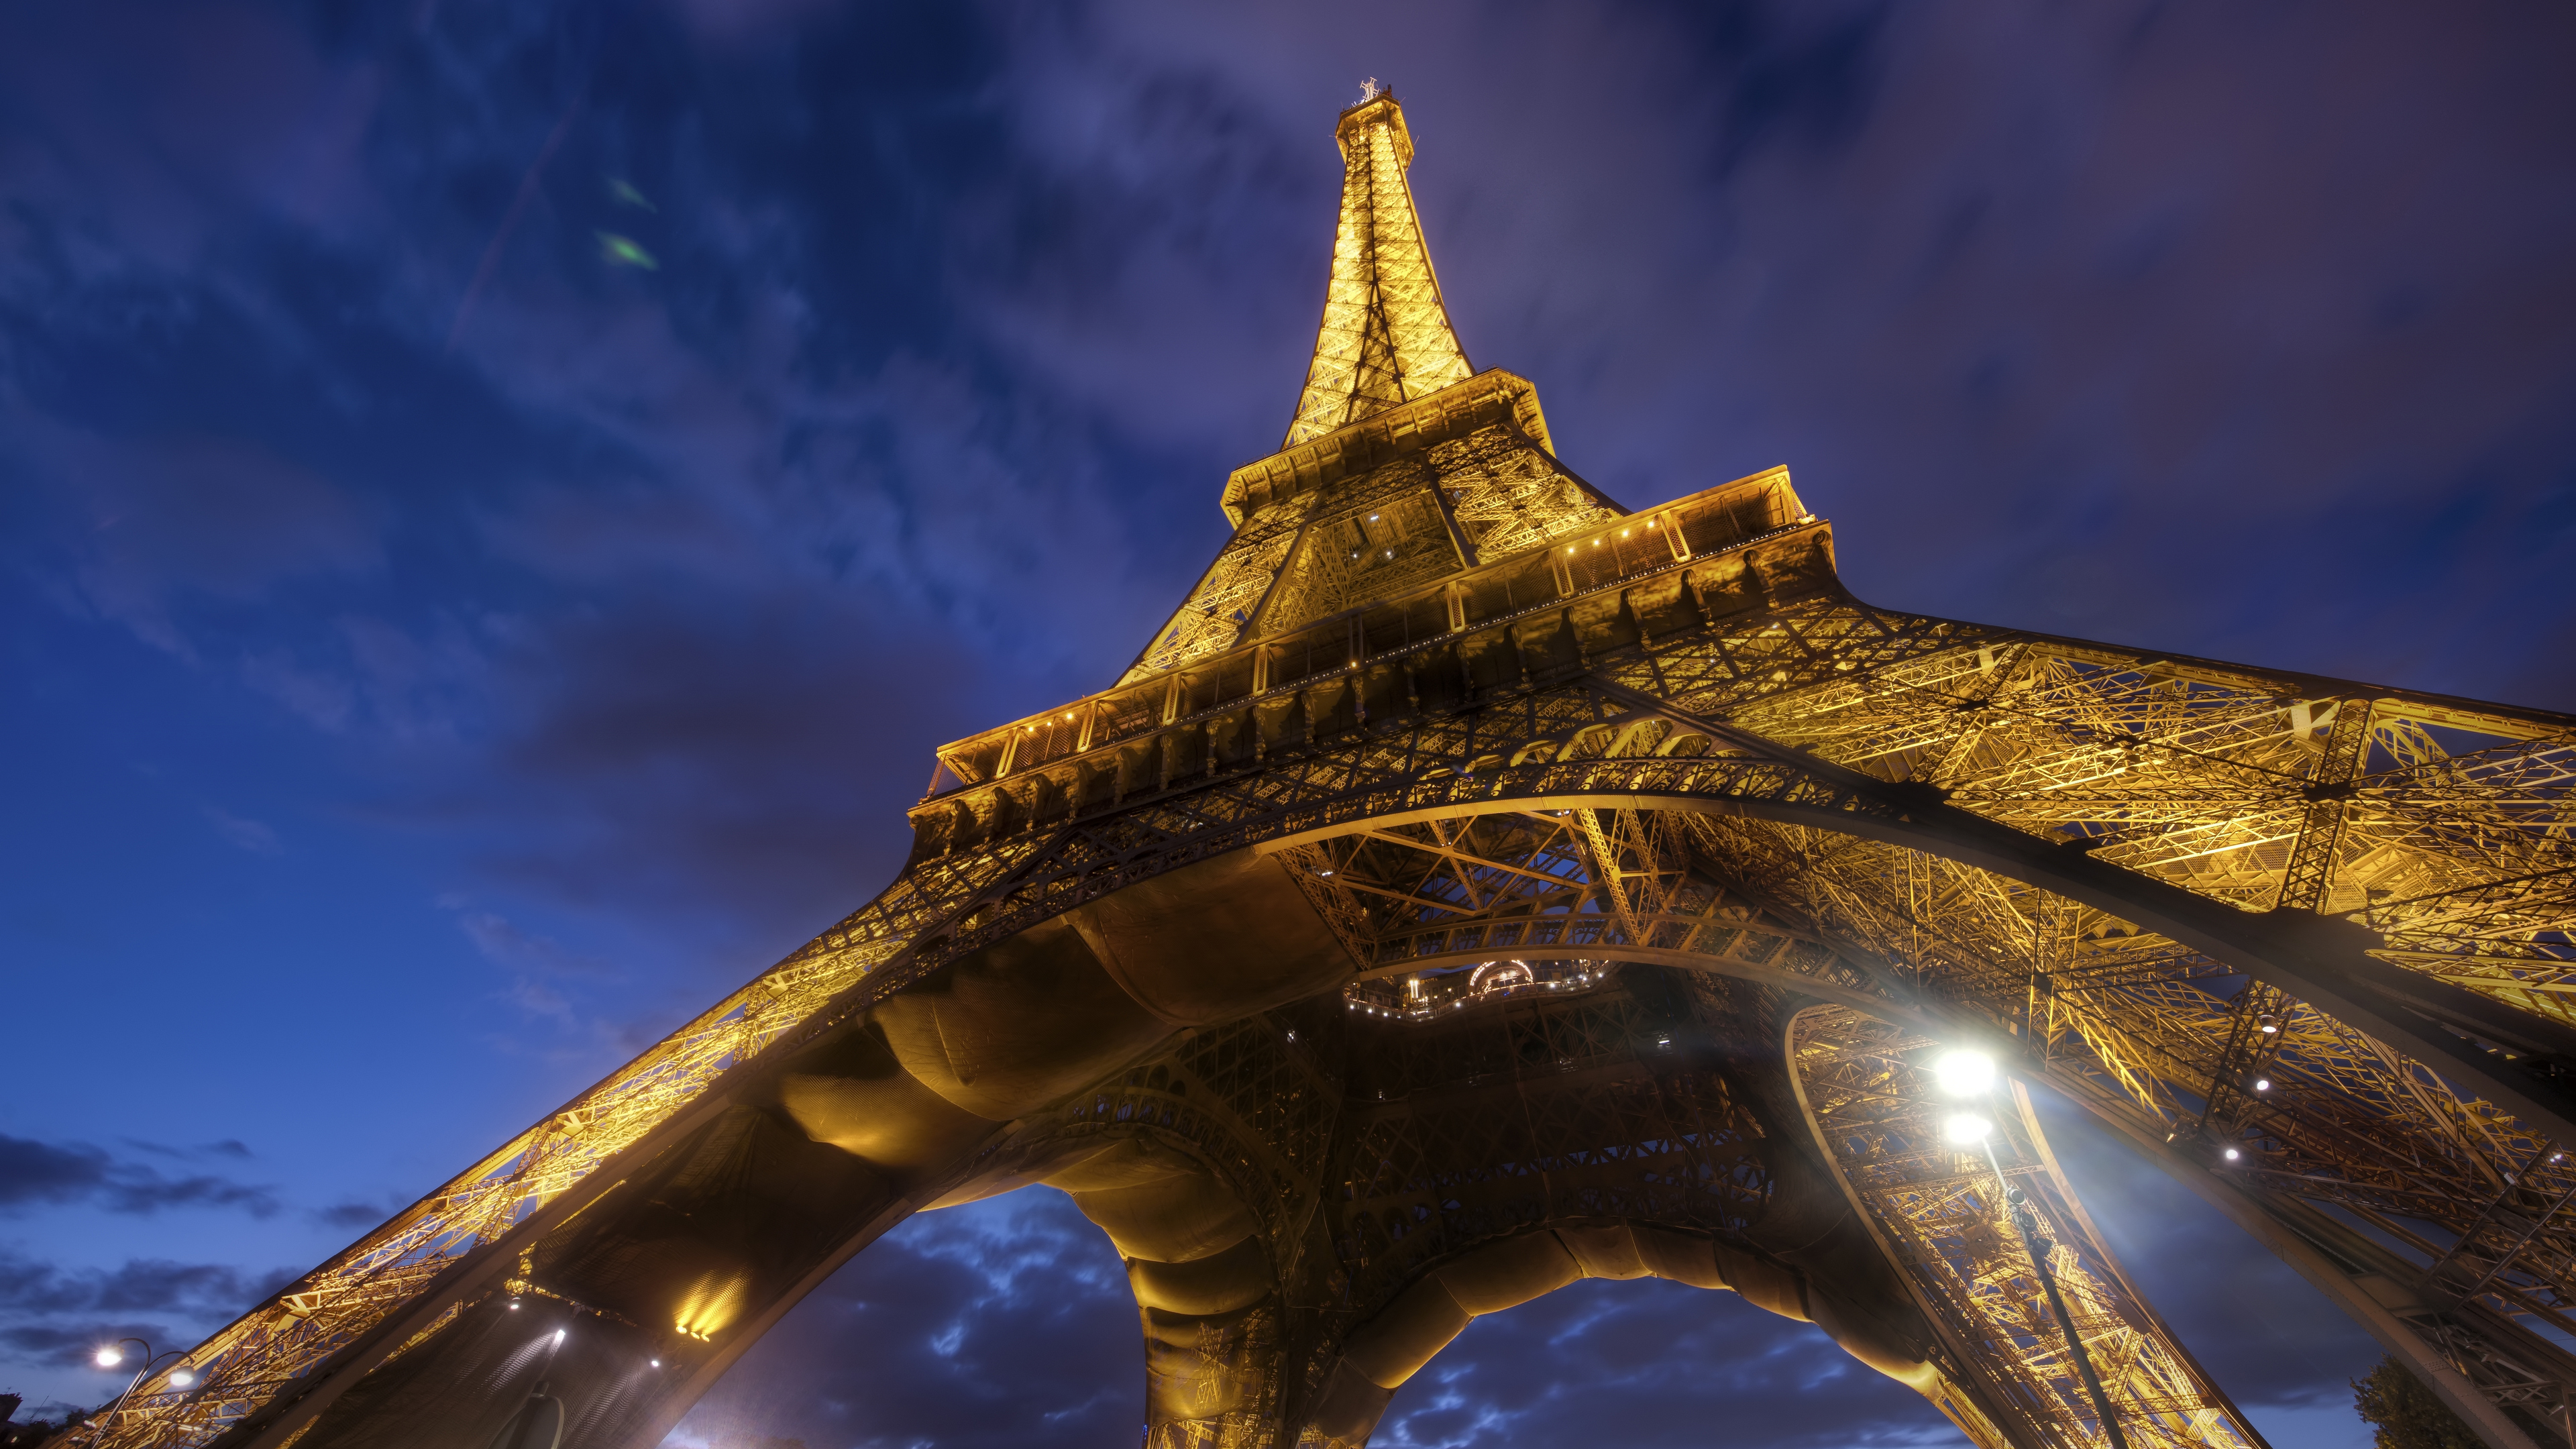 Trey Ratcliff Photography Cityscape France Paris Eiffel Tower Building From Below Lights Sky Clouds 3840x2160